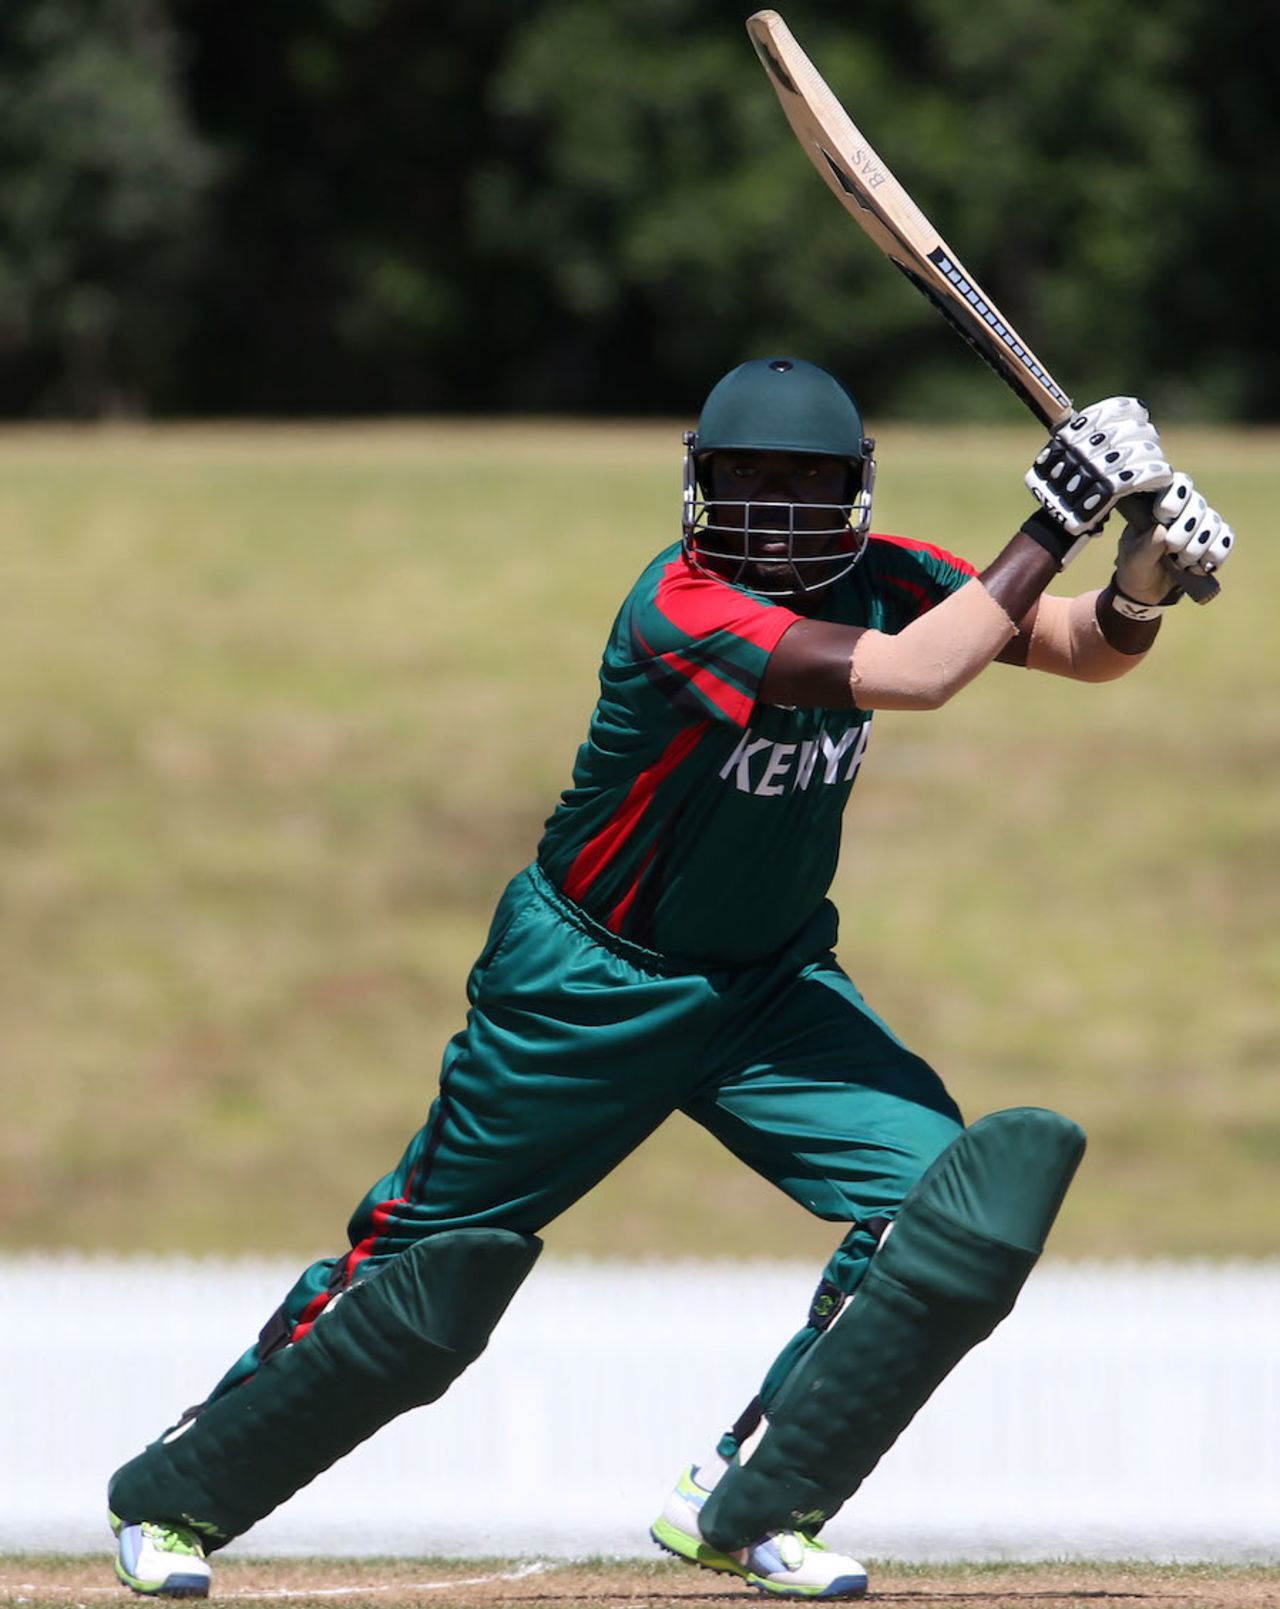 Steve Tikolo was the top-scorer for Kenya with 47, Kenya v Namibia, World Cup 2015 qualifiers, Mount Maunganui, January 17, 2014